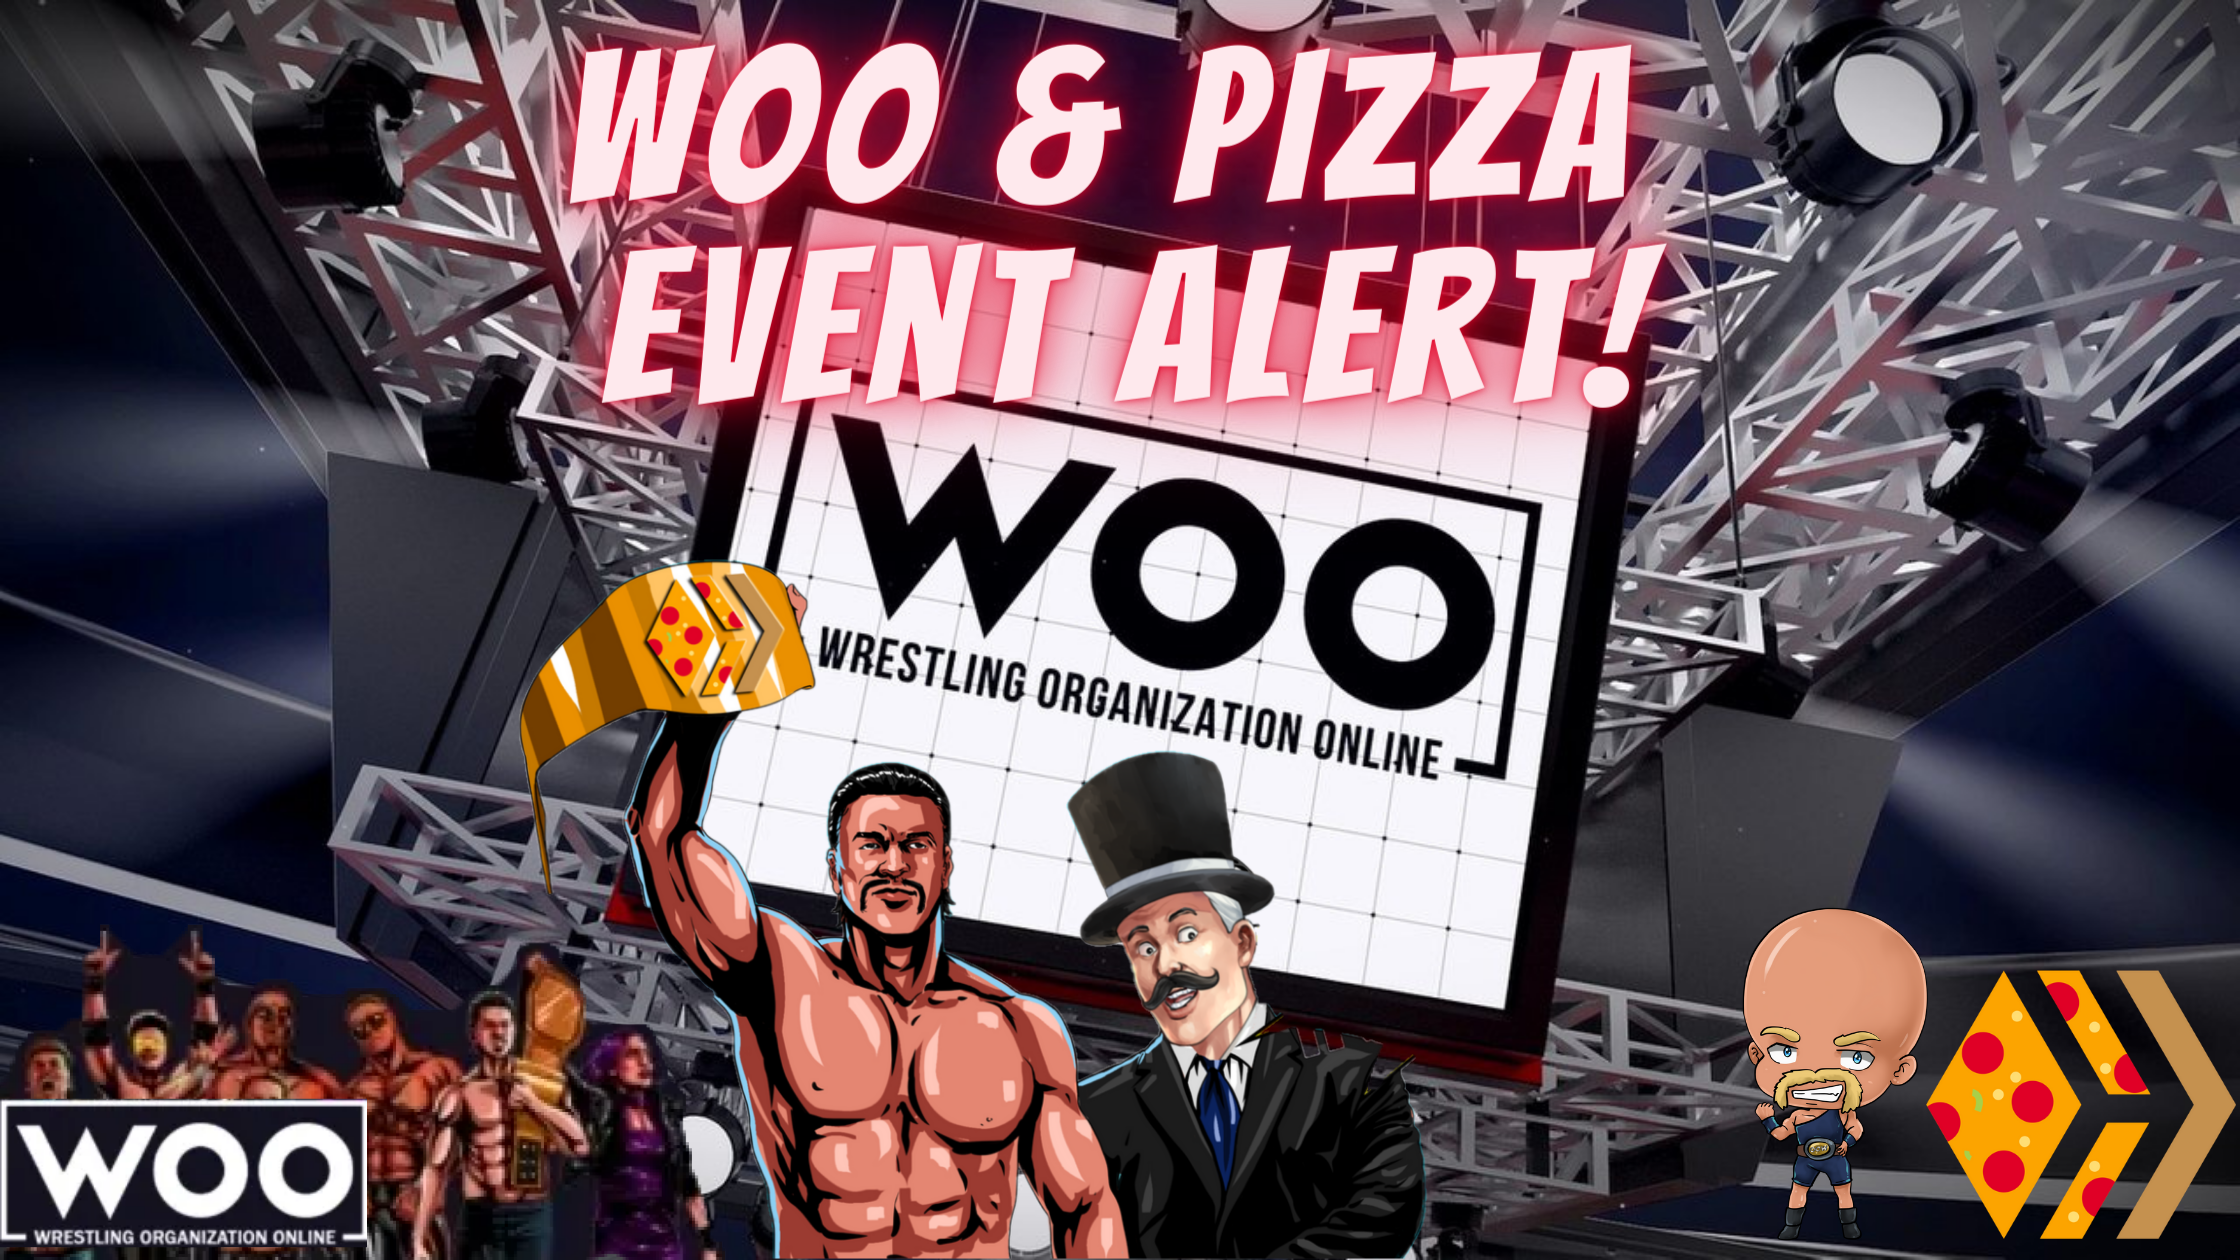 @blitzzzz/woo-jeopardy--pizza-woo-pack-openinggiveaway--ama-events-alert-3-back-to-back-events-starting-in-2-hours-time-dont-miss-i